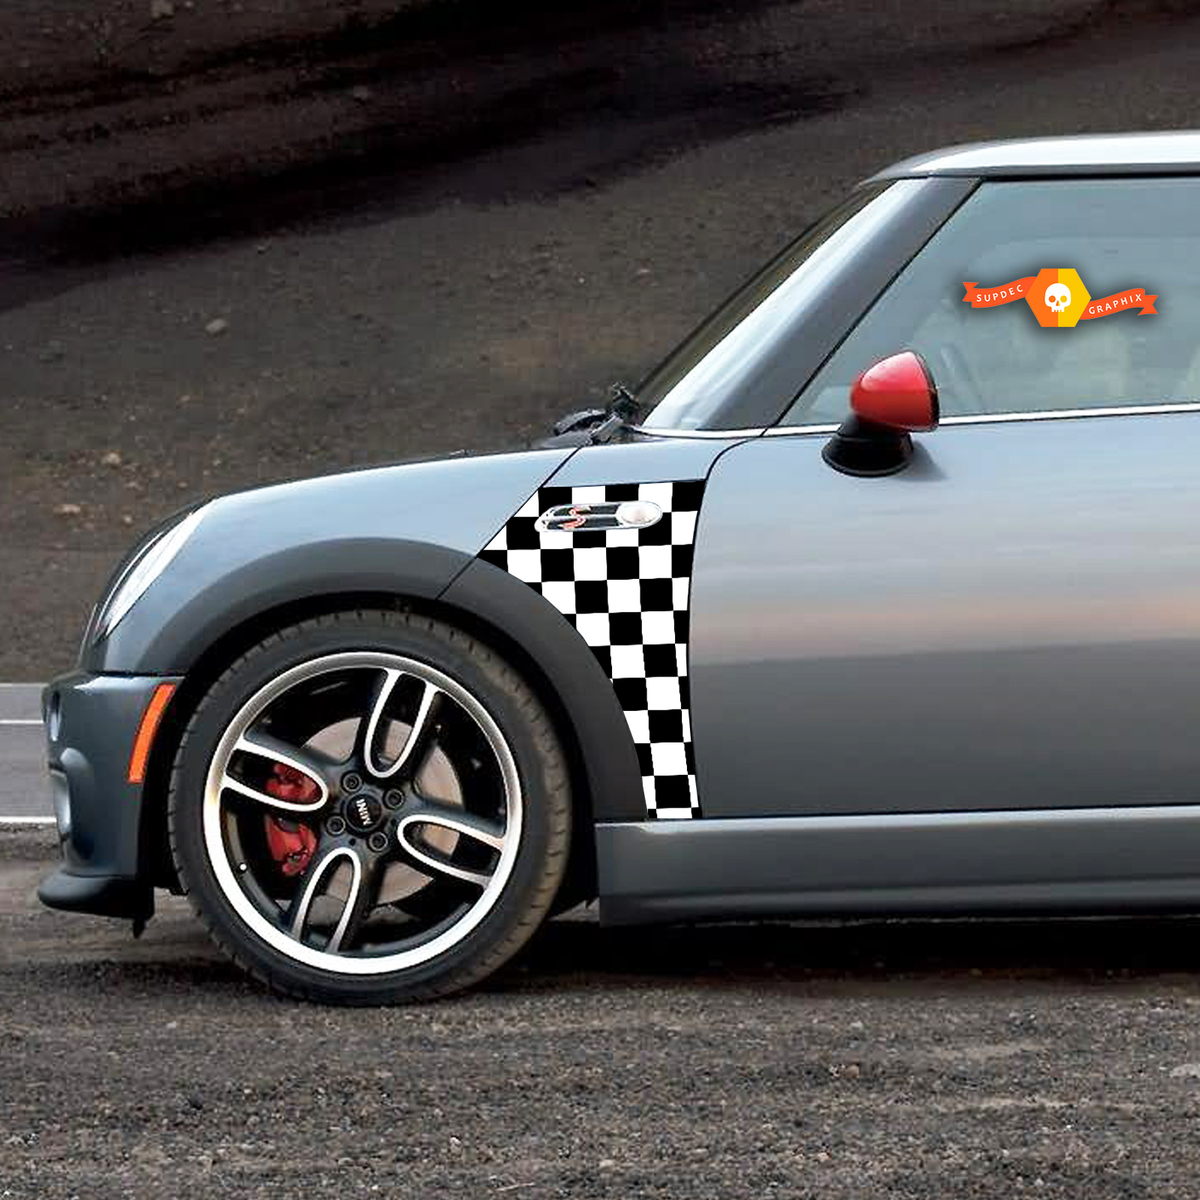 2002 2006 Mini Cooper Checkmate A Panel Checkered Decal Vinyl Graphics Stickers